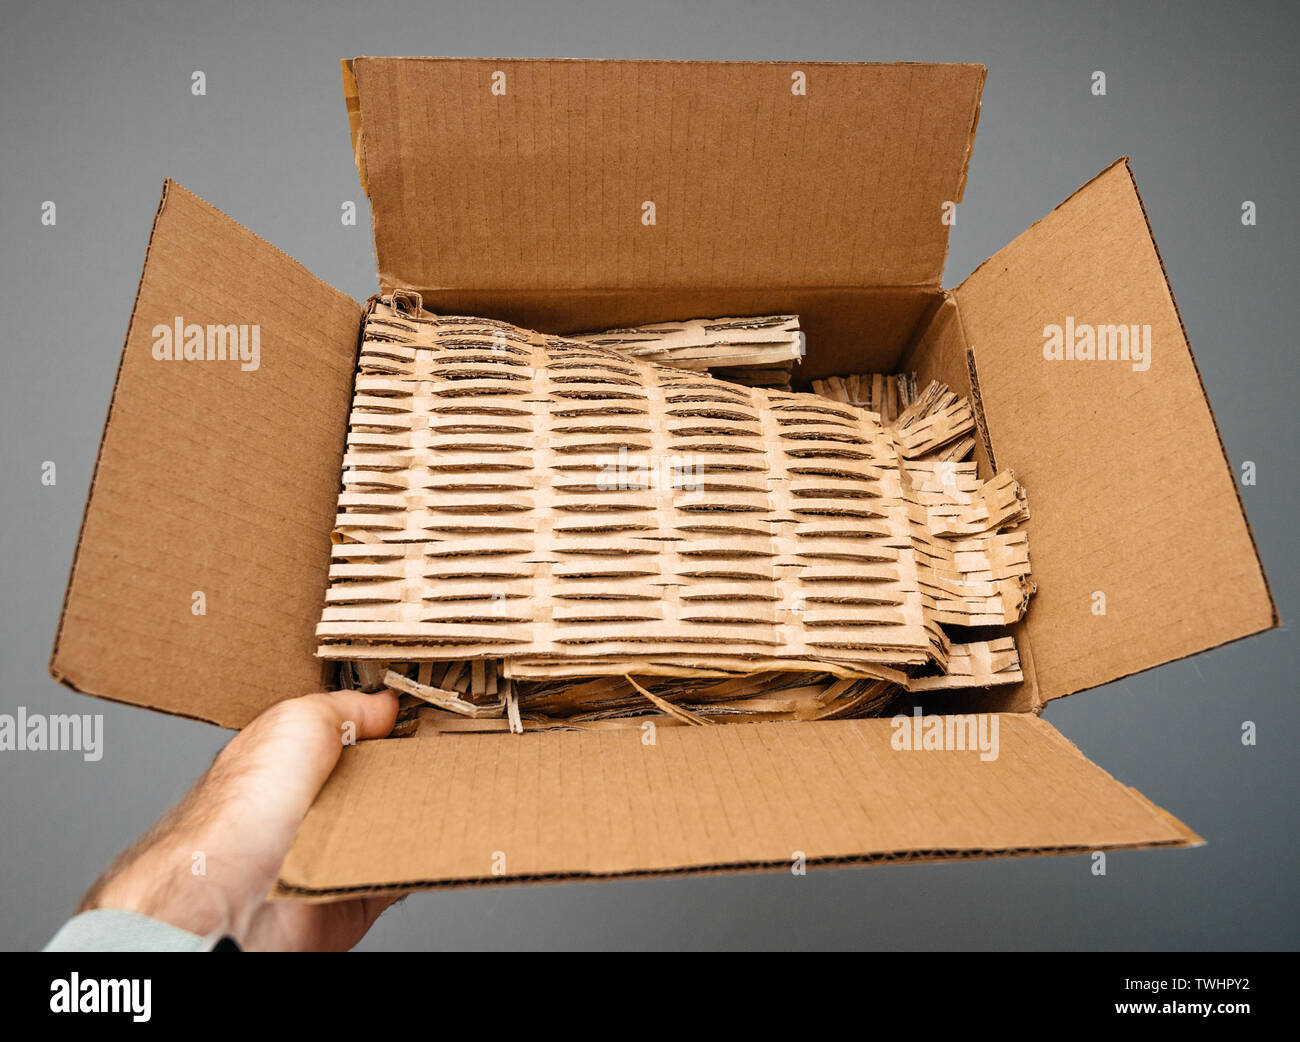 holding open cardboard box after before unboxing with protective paper  carton Stock Photo - Alamy